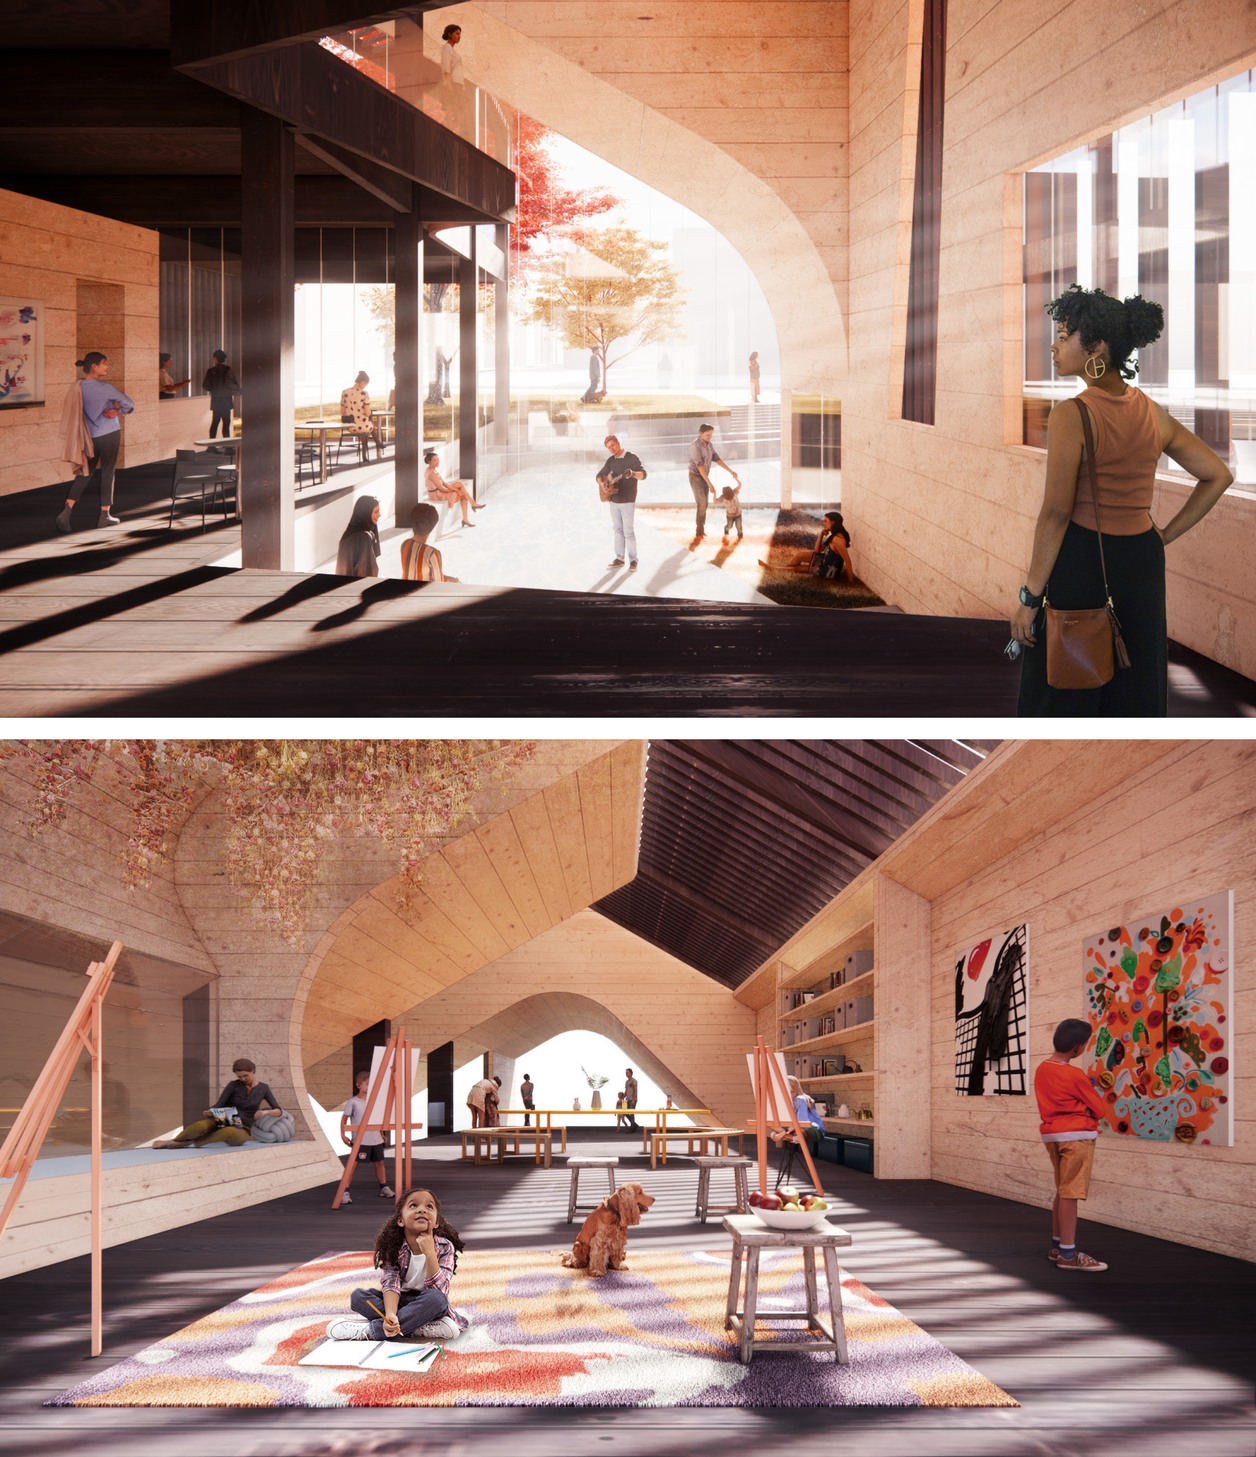 Interior views of gathering space on the ground level of local artist studios and the children's art classroom above